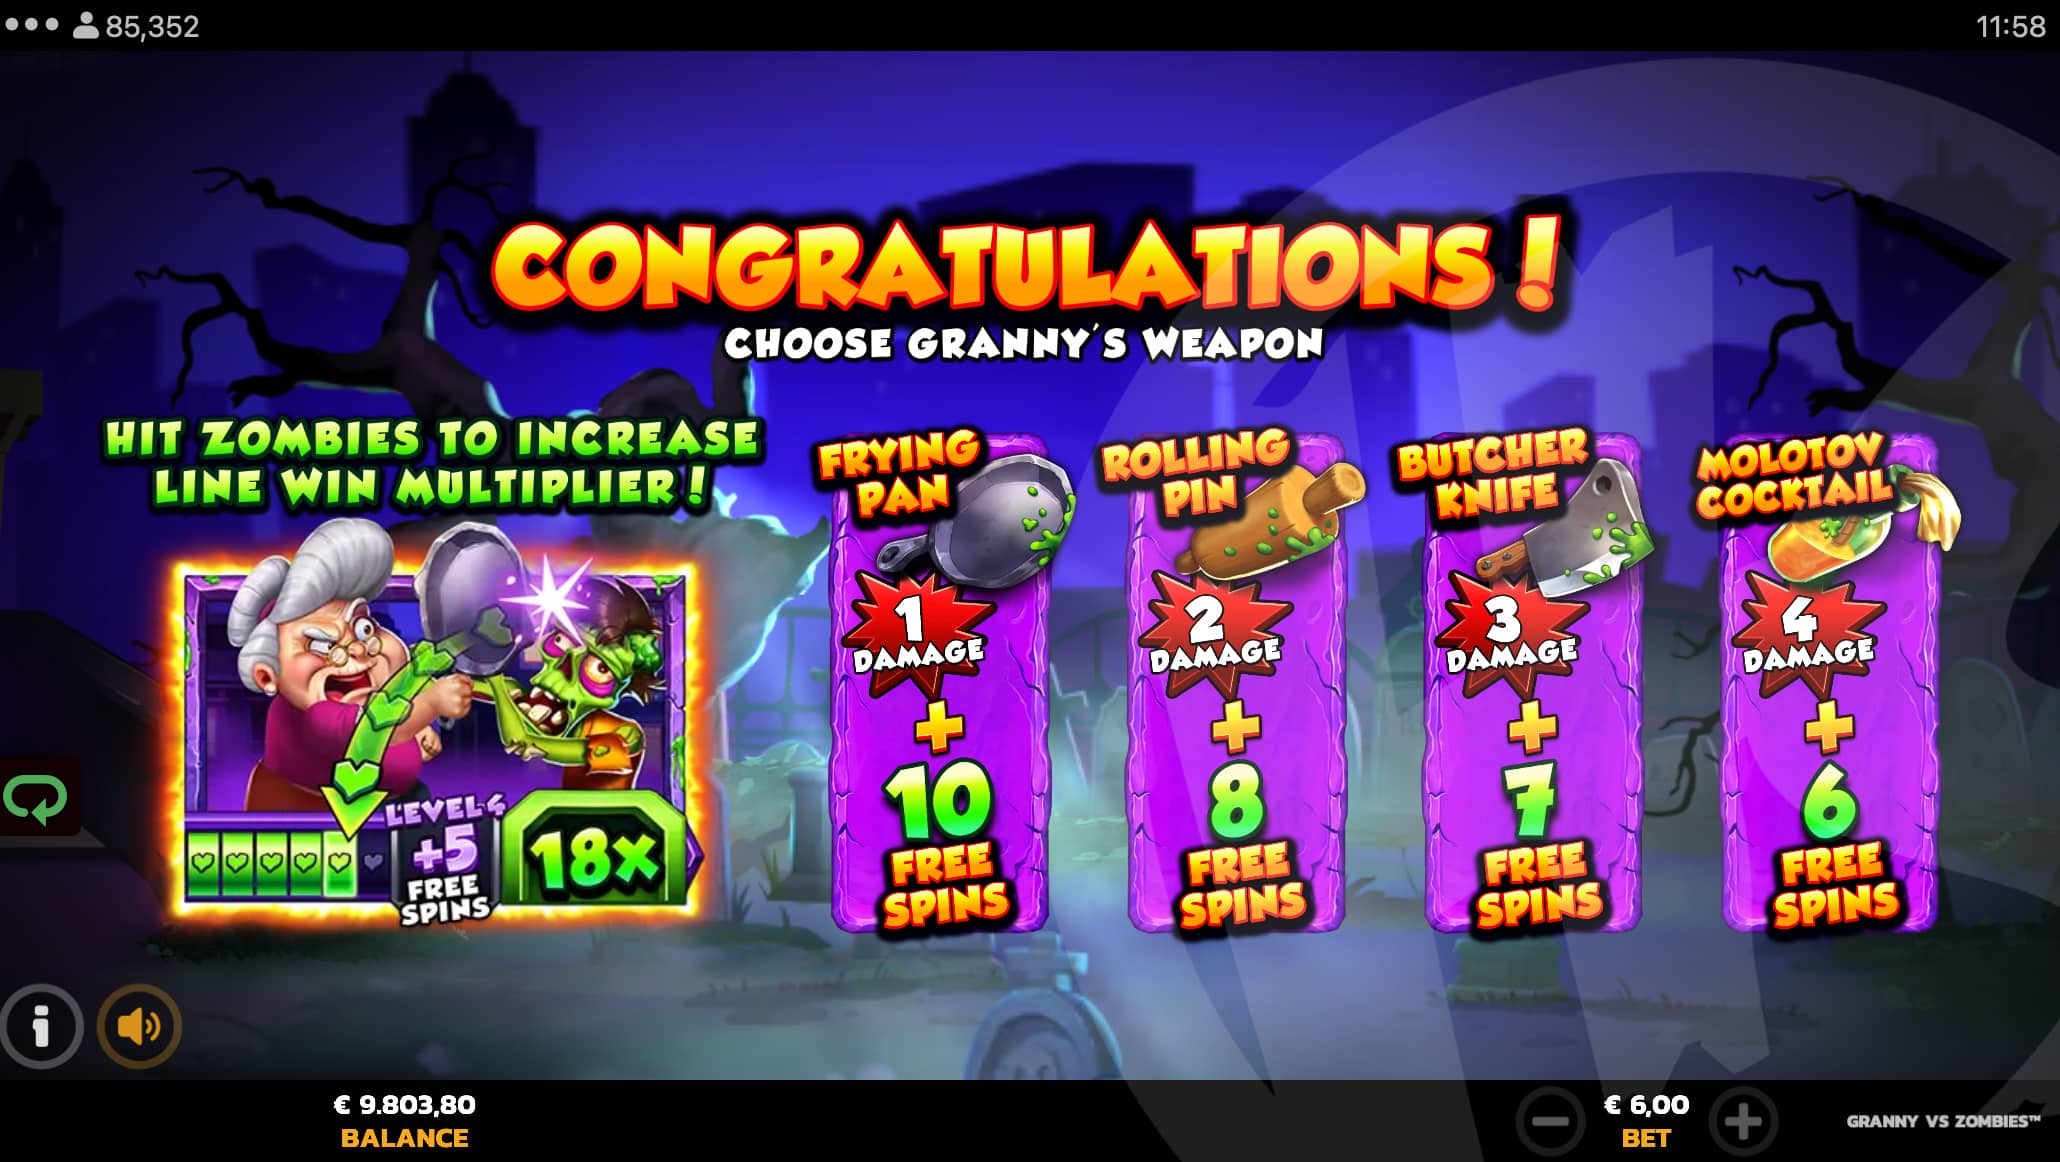 Choose One of Four Weapons to Determine Starting Spins and Damage Points in Free Spins